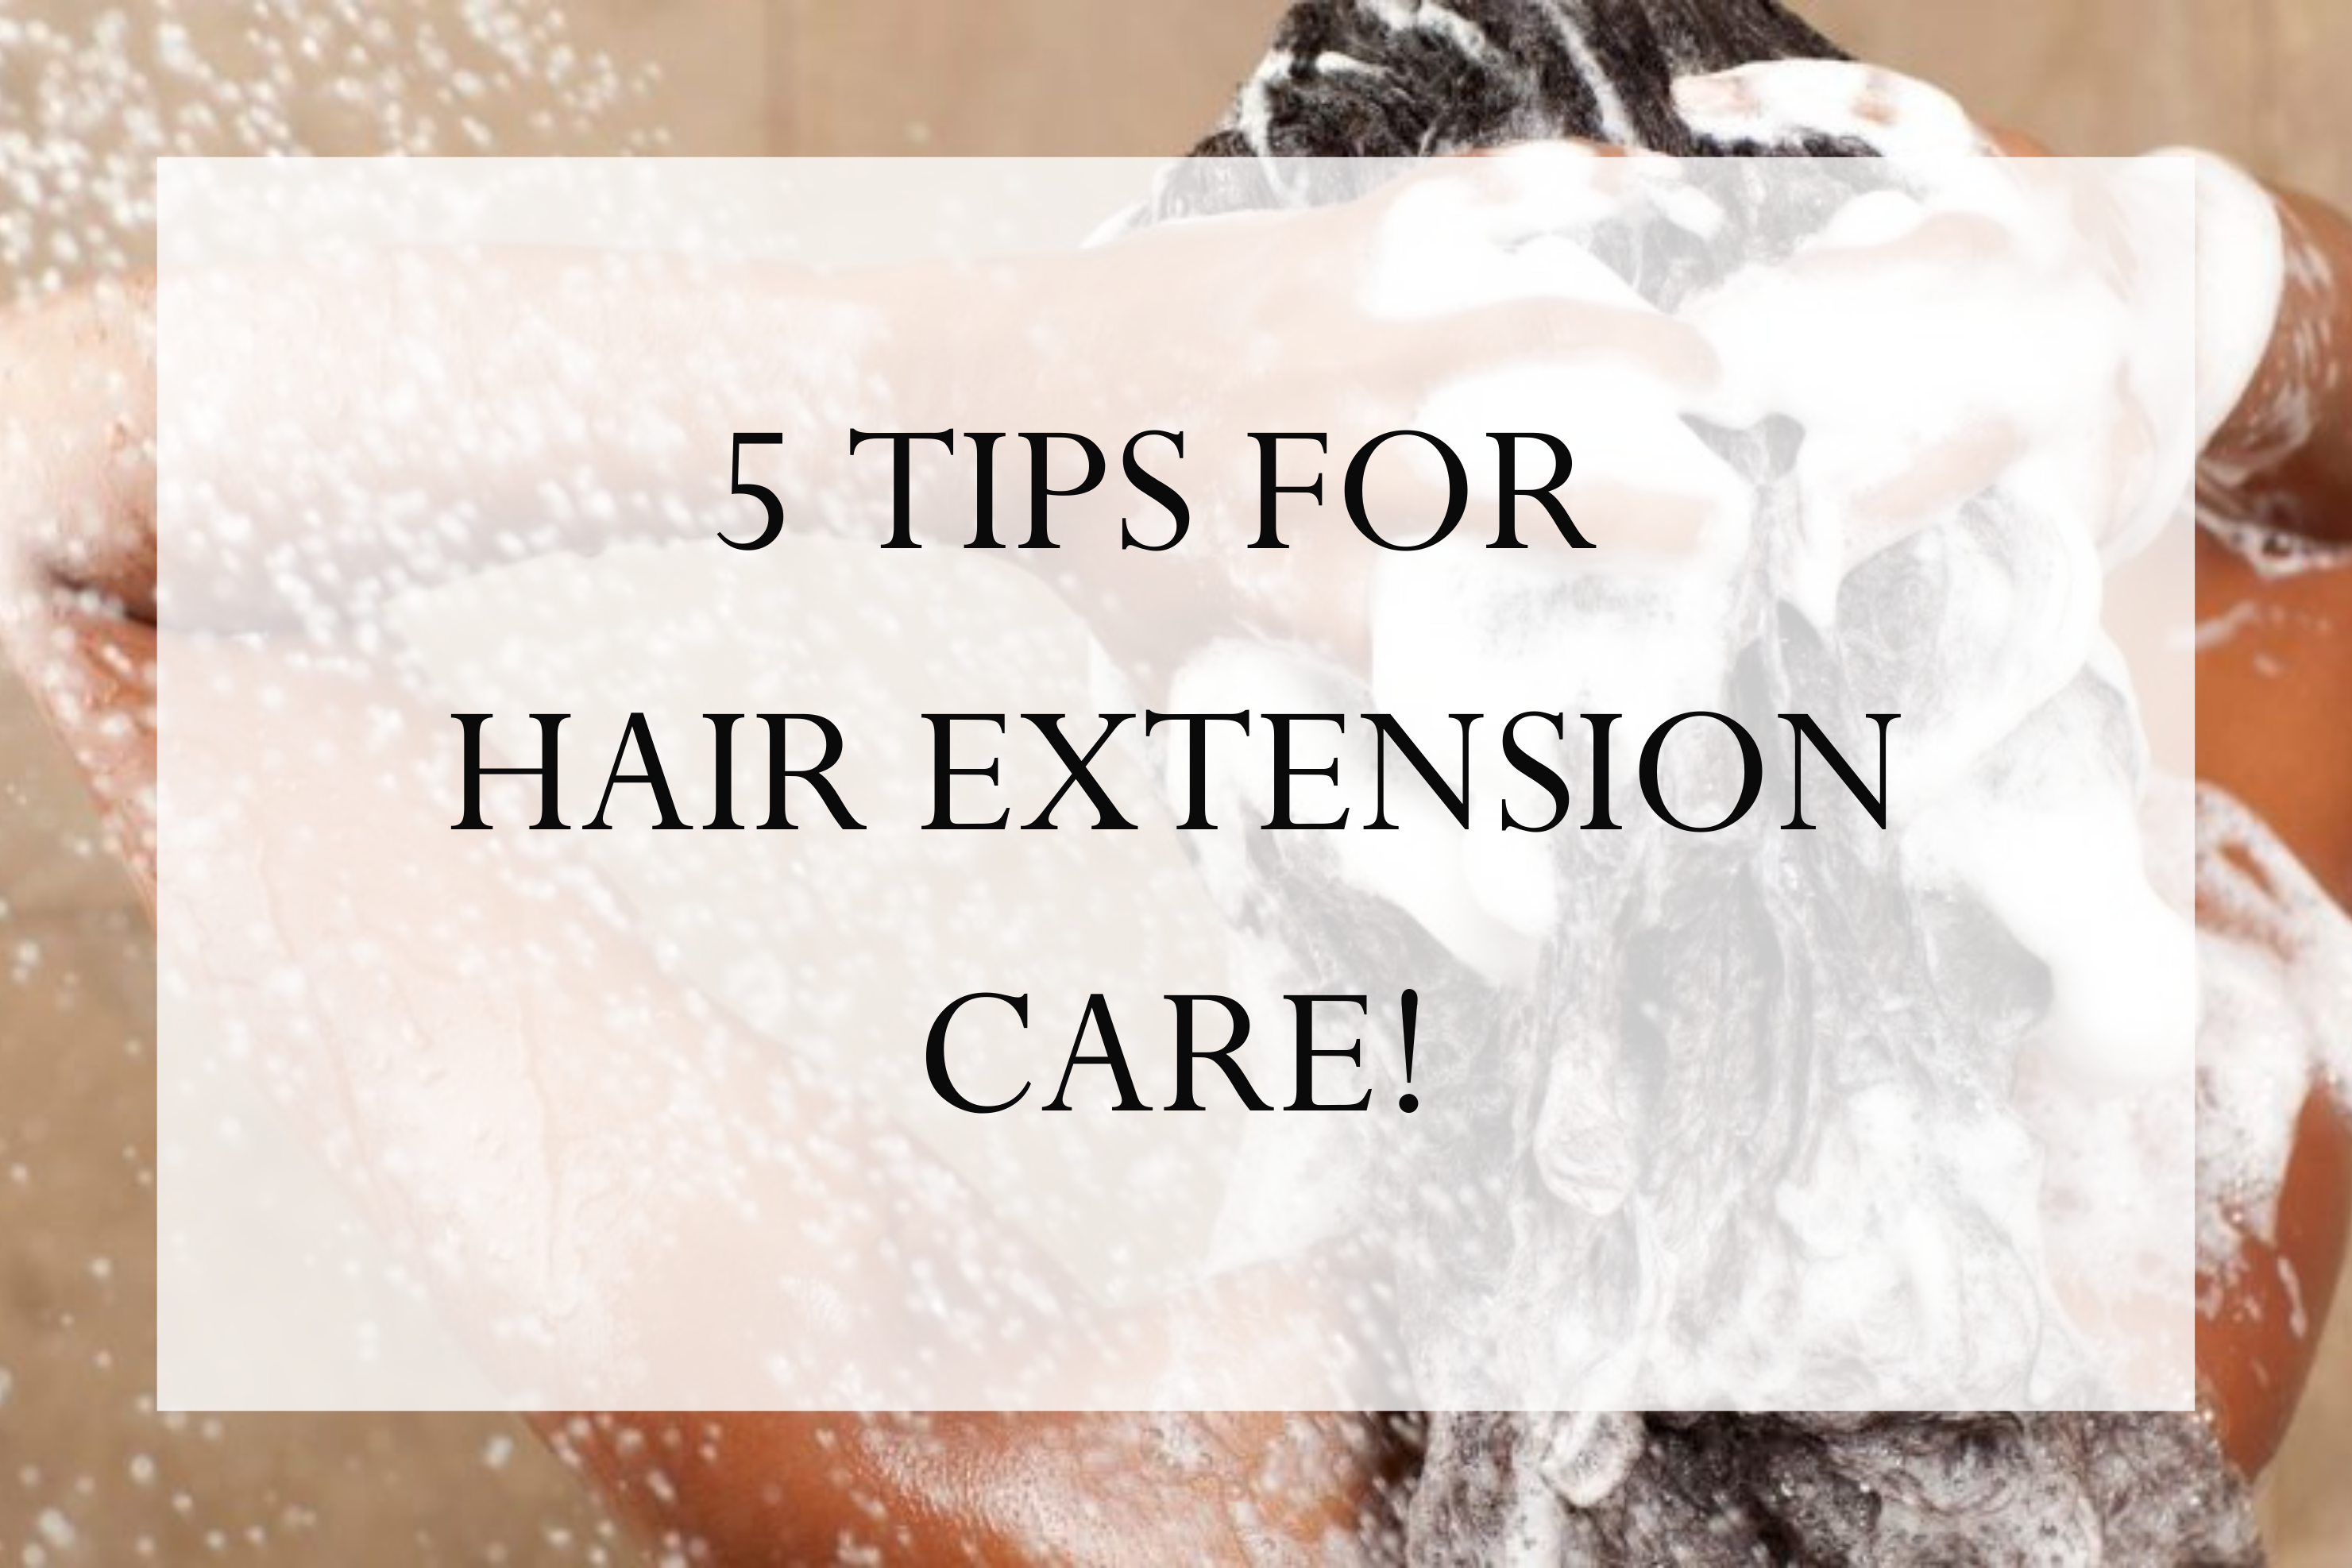 How to care for hair extensions - Top 5 tips | Sophia Hair Australia